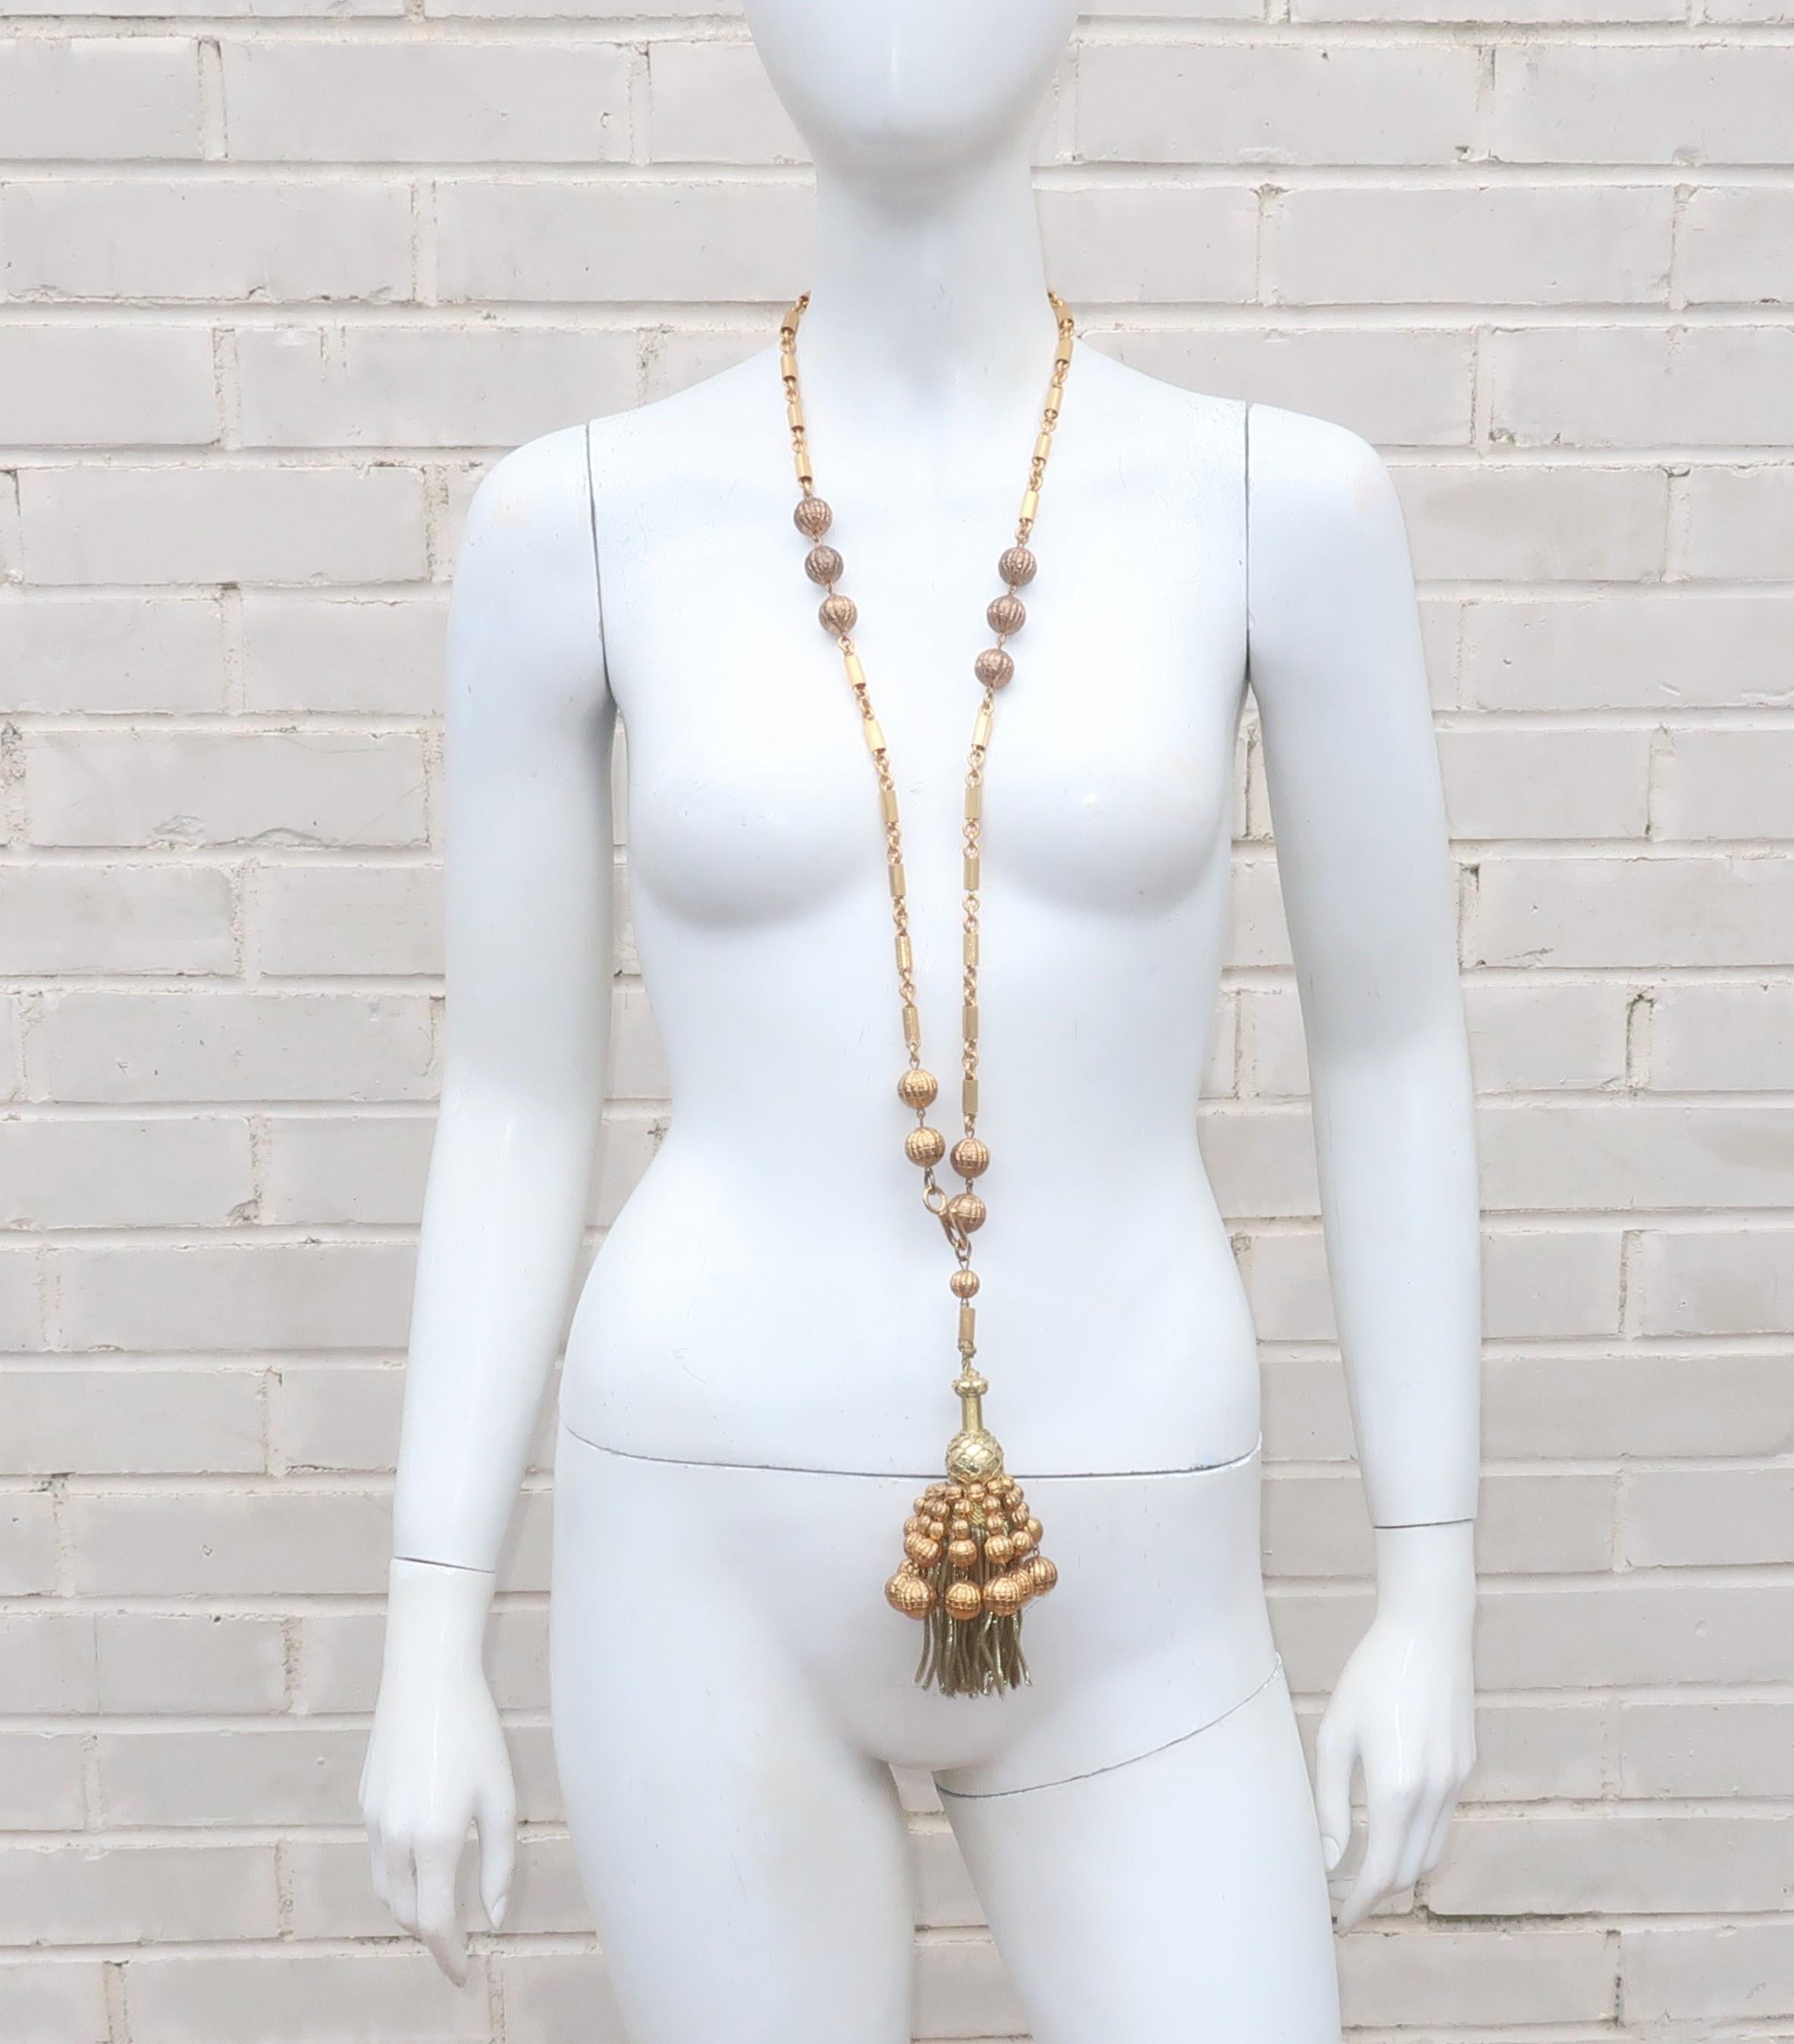 A great 1960’s gold beaded tassel and chain that can do double duty as an opera length statement necklace or a swag belt with a quick change of the hook.  A fun swinging sixties look that has an Art Deco revival style perfect for accessorizing a